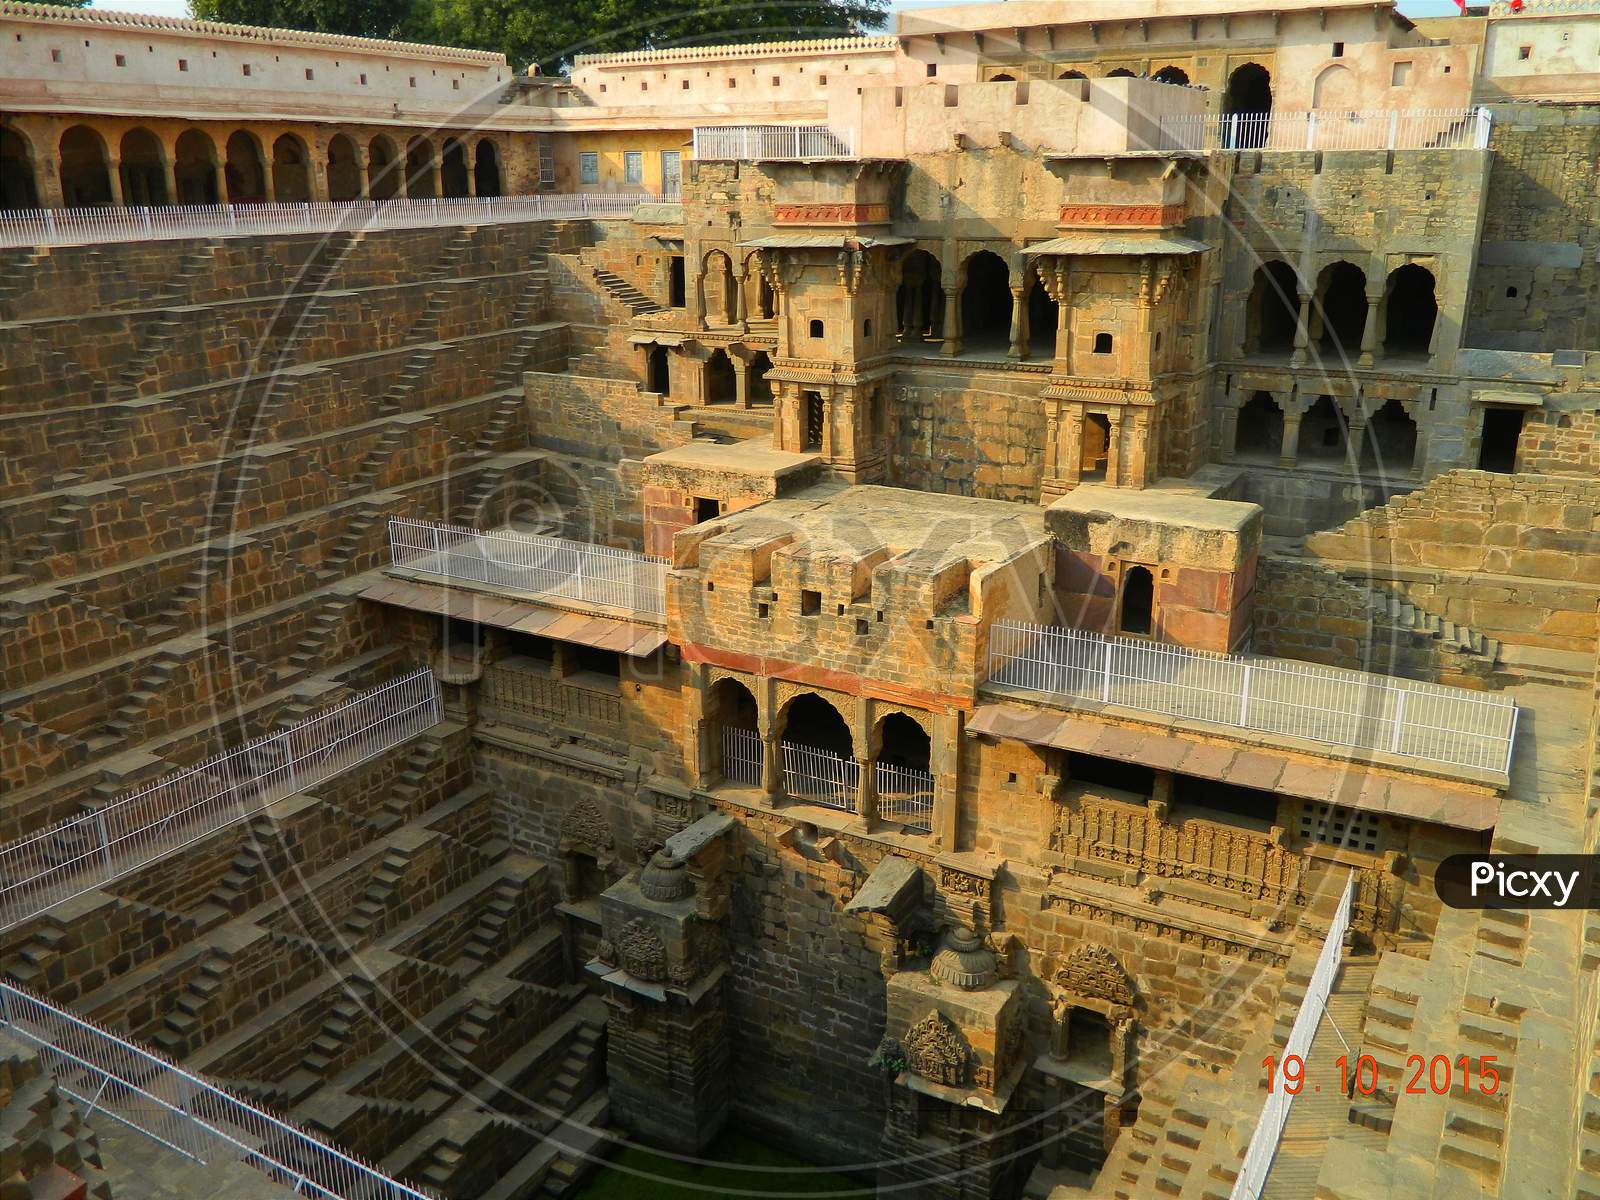 Sculptures and architectural glimpses of Abhaneri stepwell